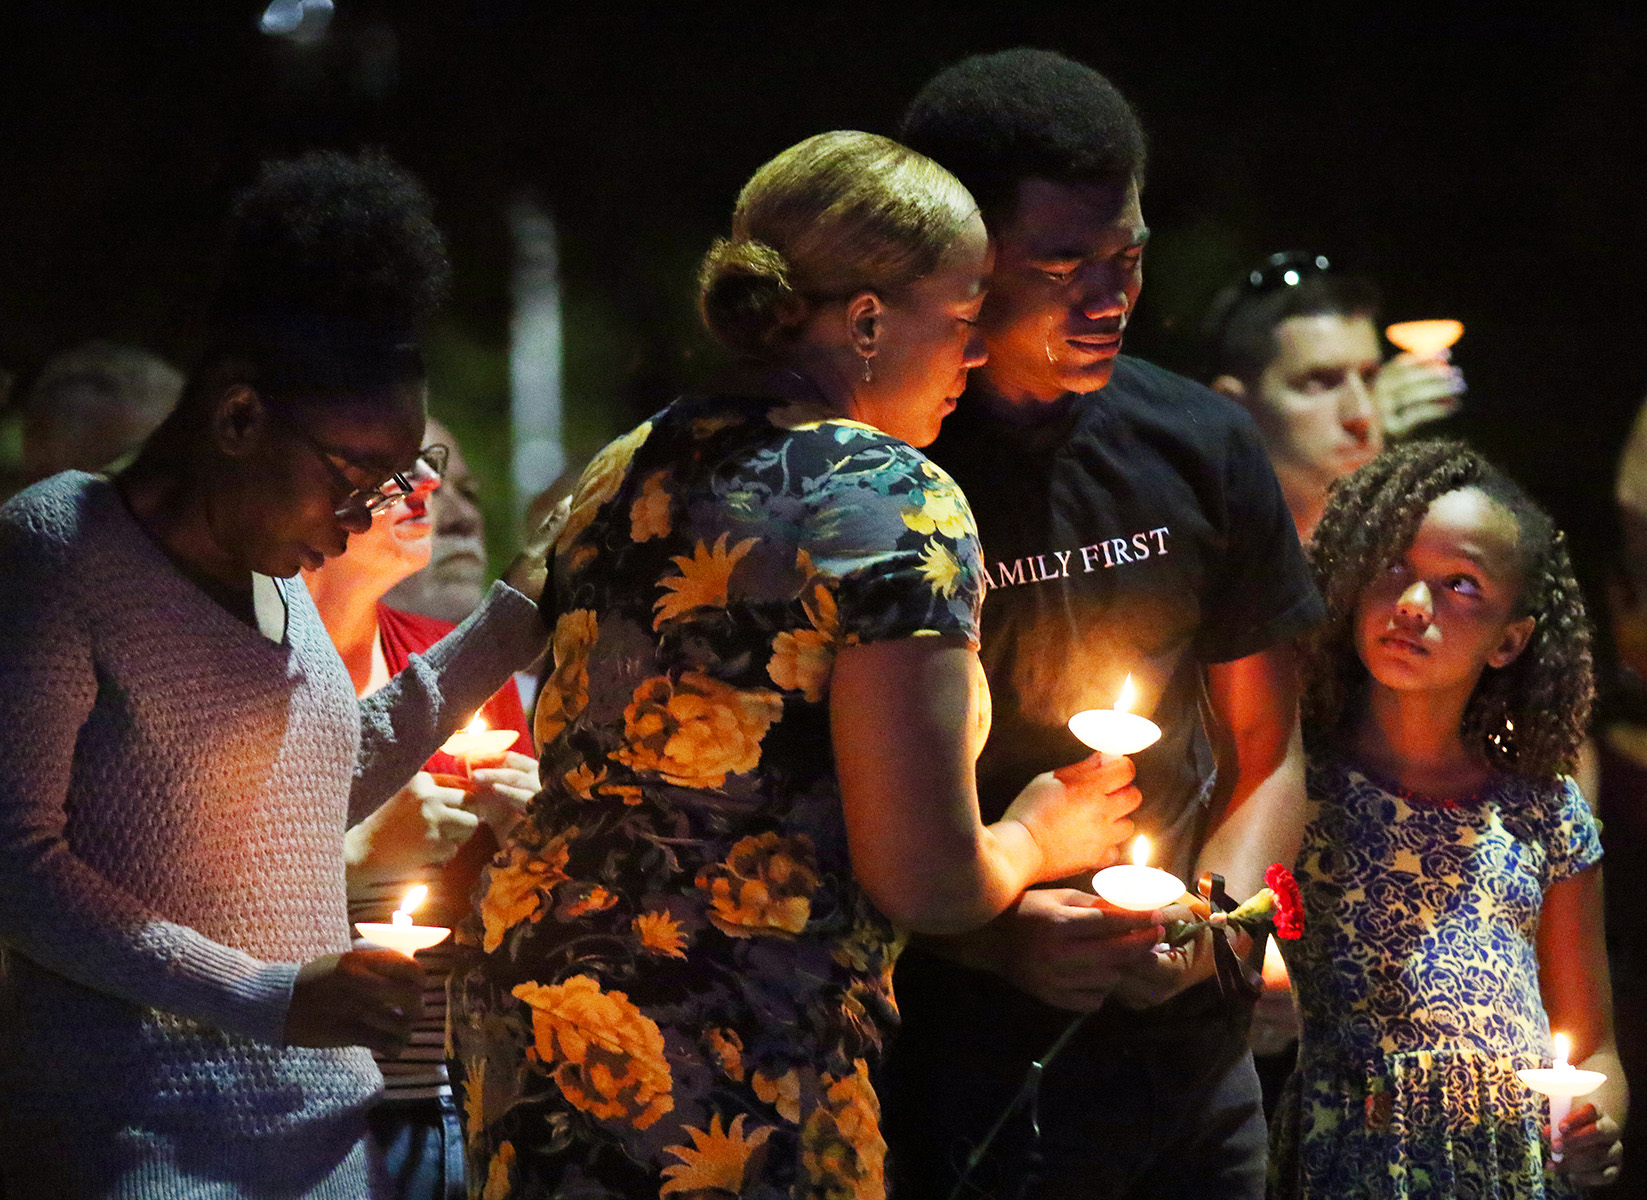 Veronica Hartfield, center, wife of slain LVMPD Officer Charleston Hartfield embraces son Ayzayah Hartfield as daughter Savannah Hartfield, right, looks up during a candlelight vigil. Hartfield was killed Sunday night when a gunman opened fire on the three-day Route 91 Harvest country music festival, leaving 58 dead and over 500 injured in Las Vegas on October 1, 2017.